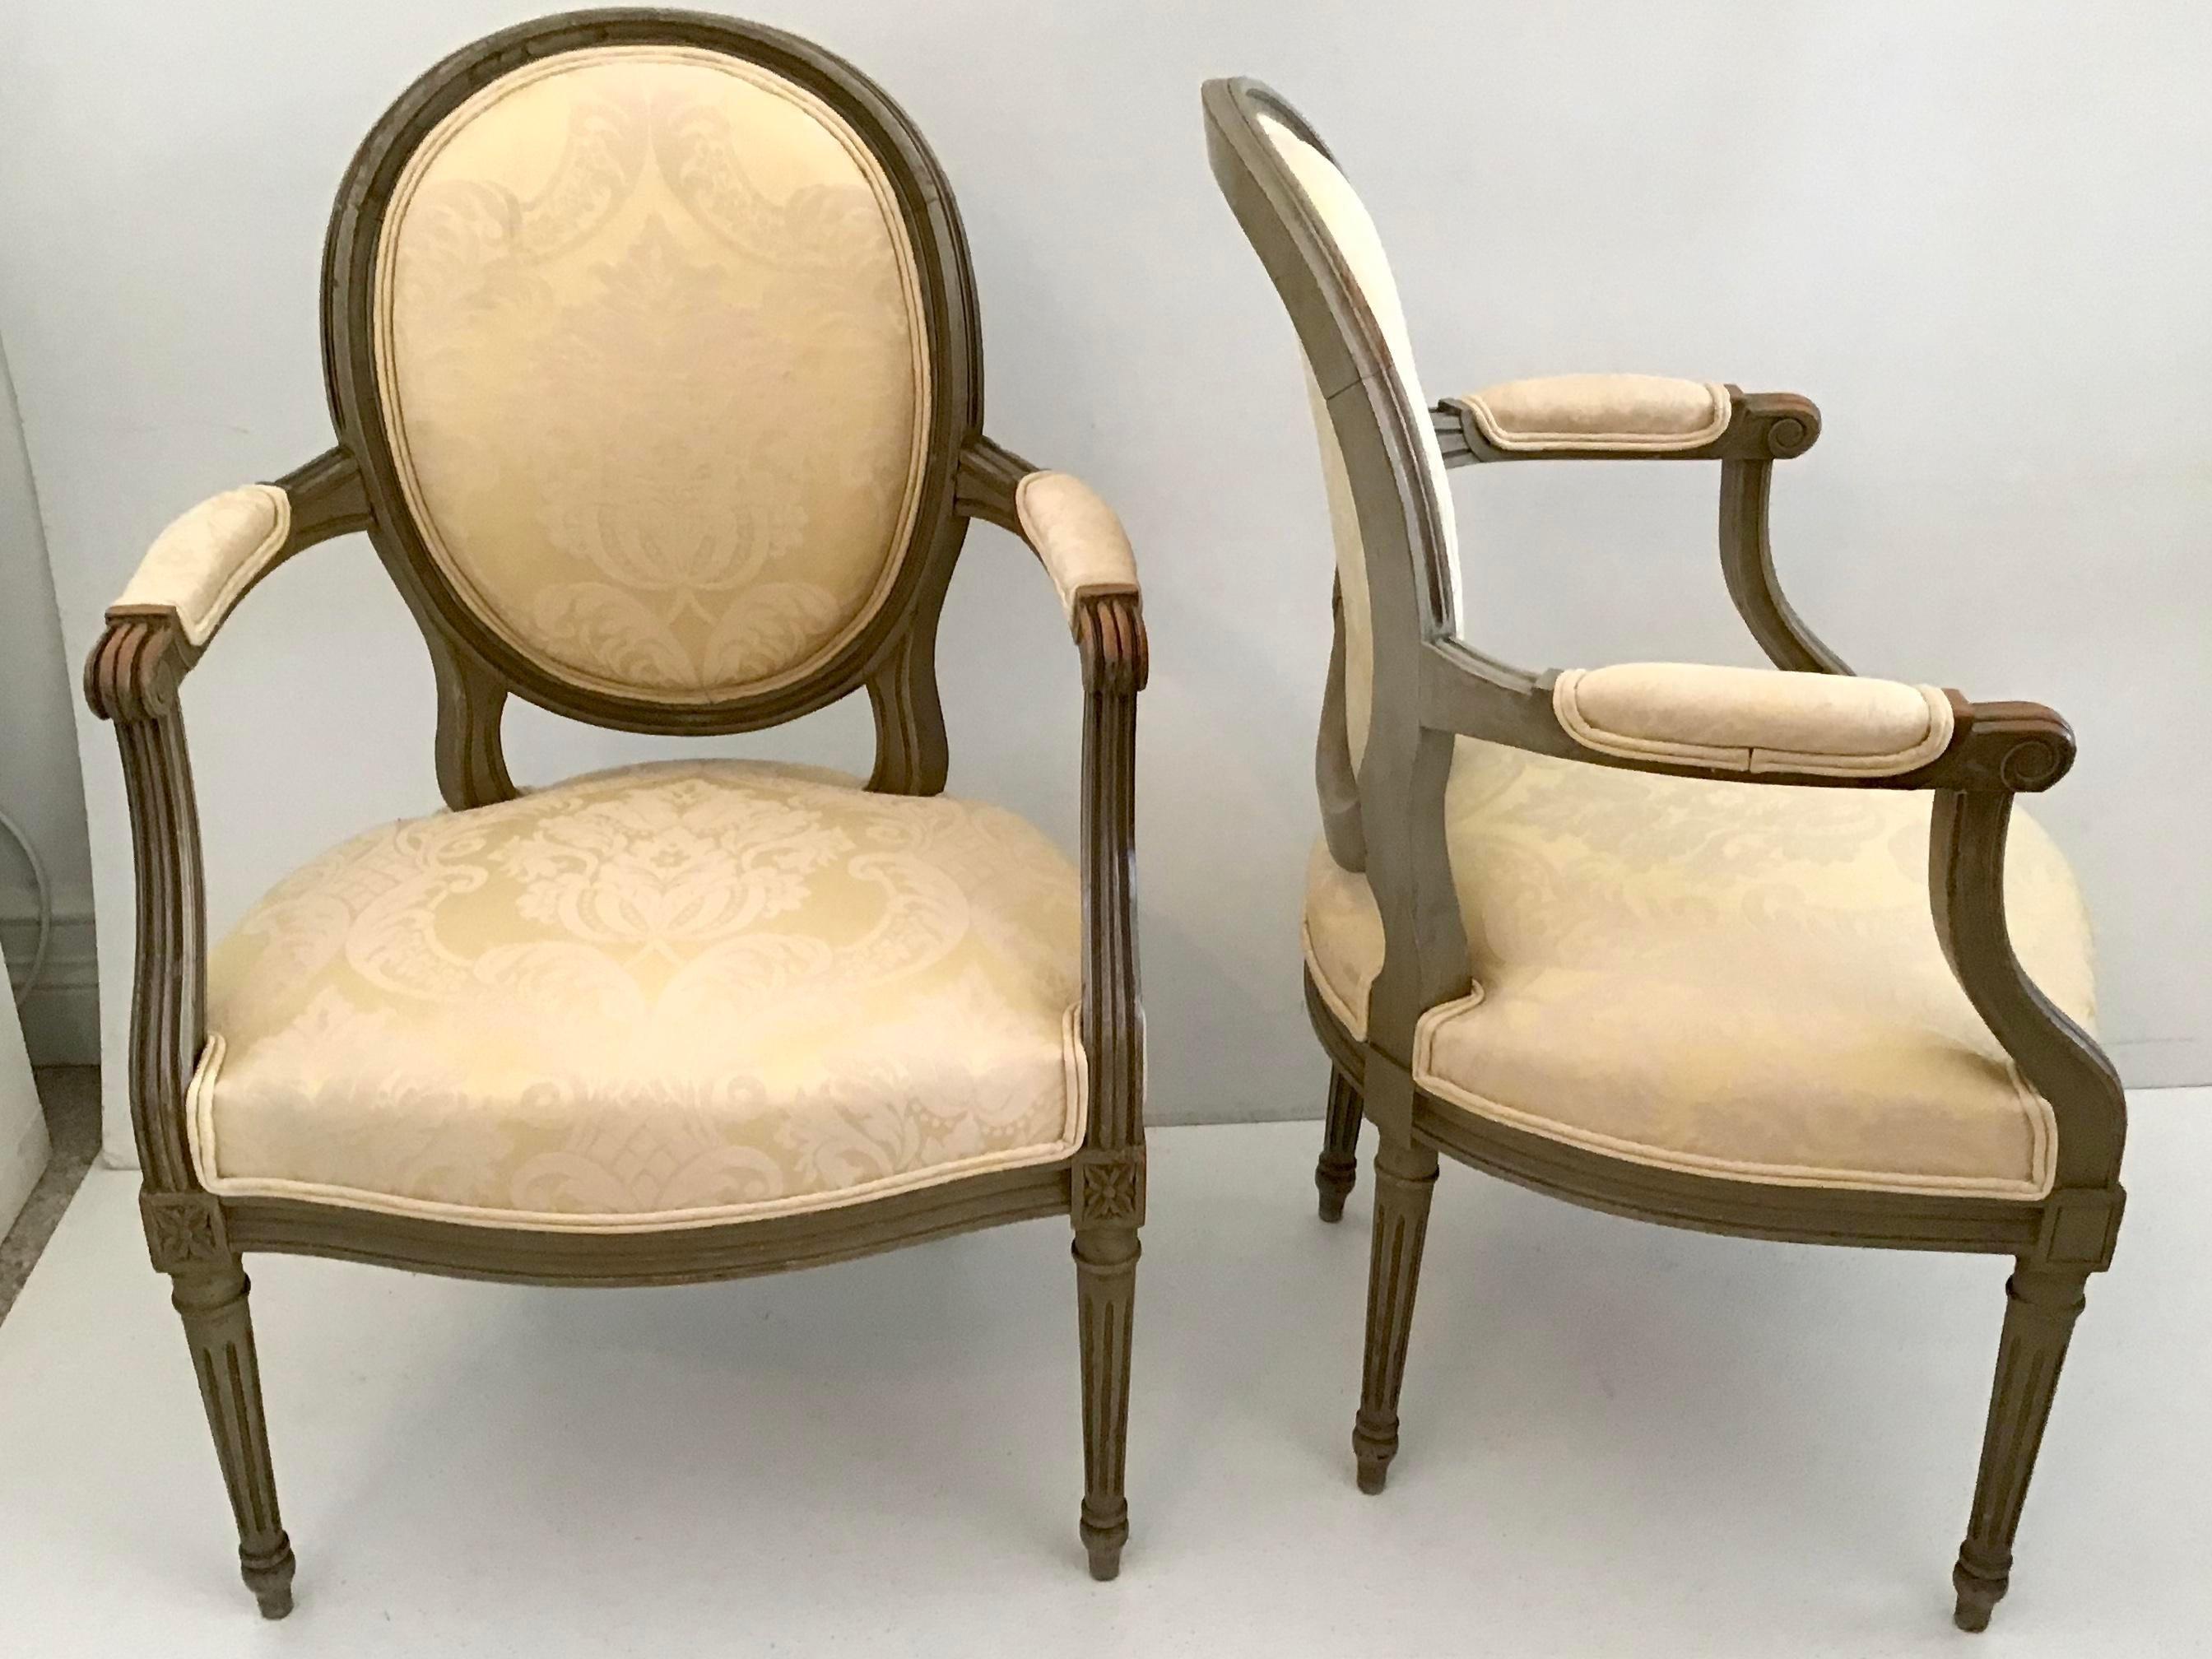 Textile French Bronze Louis XVI Fauteuils in New Yellow Damask Upholstery, a Pair For Sale